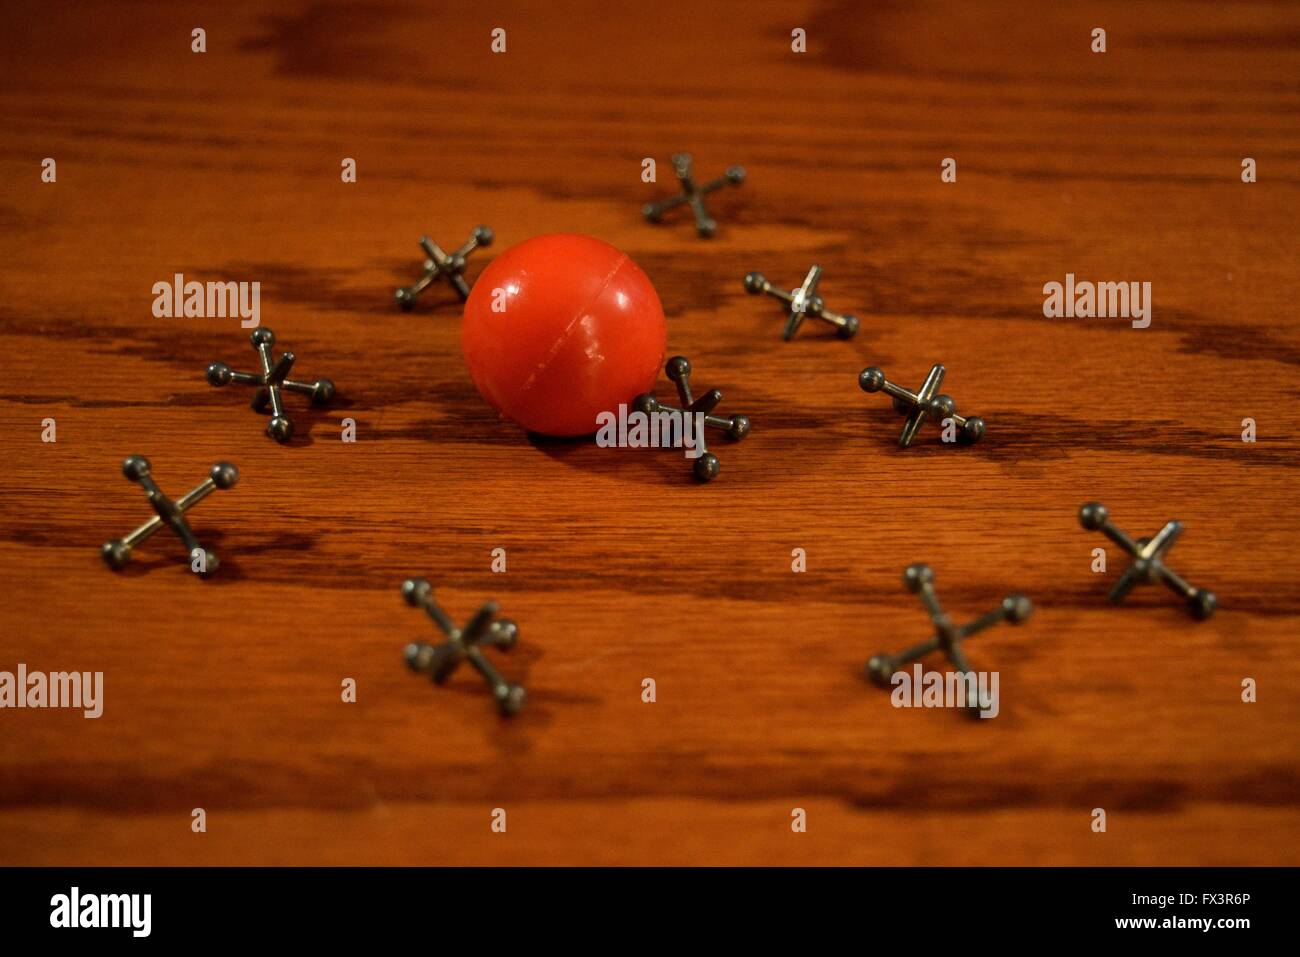 Playing jacks on a table. Stock Photo